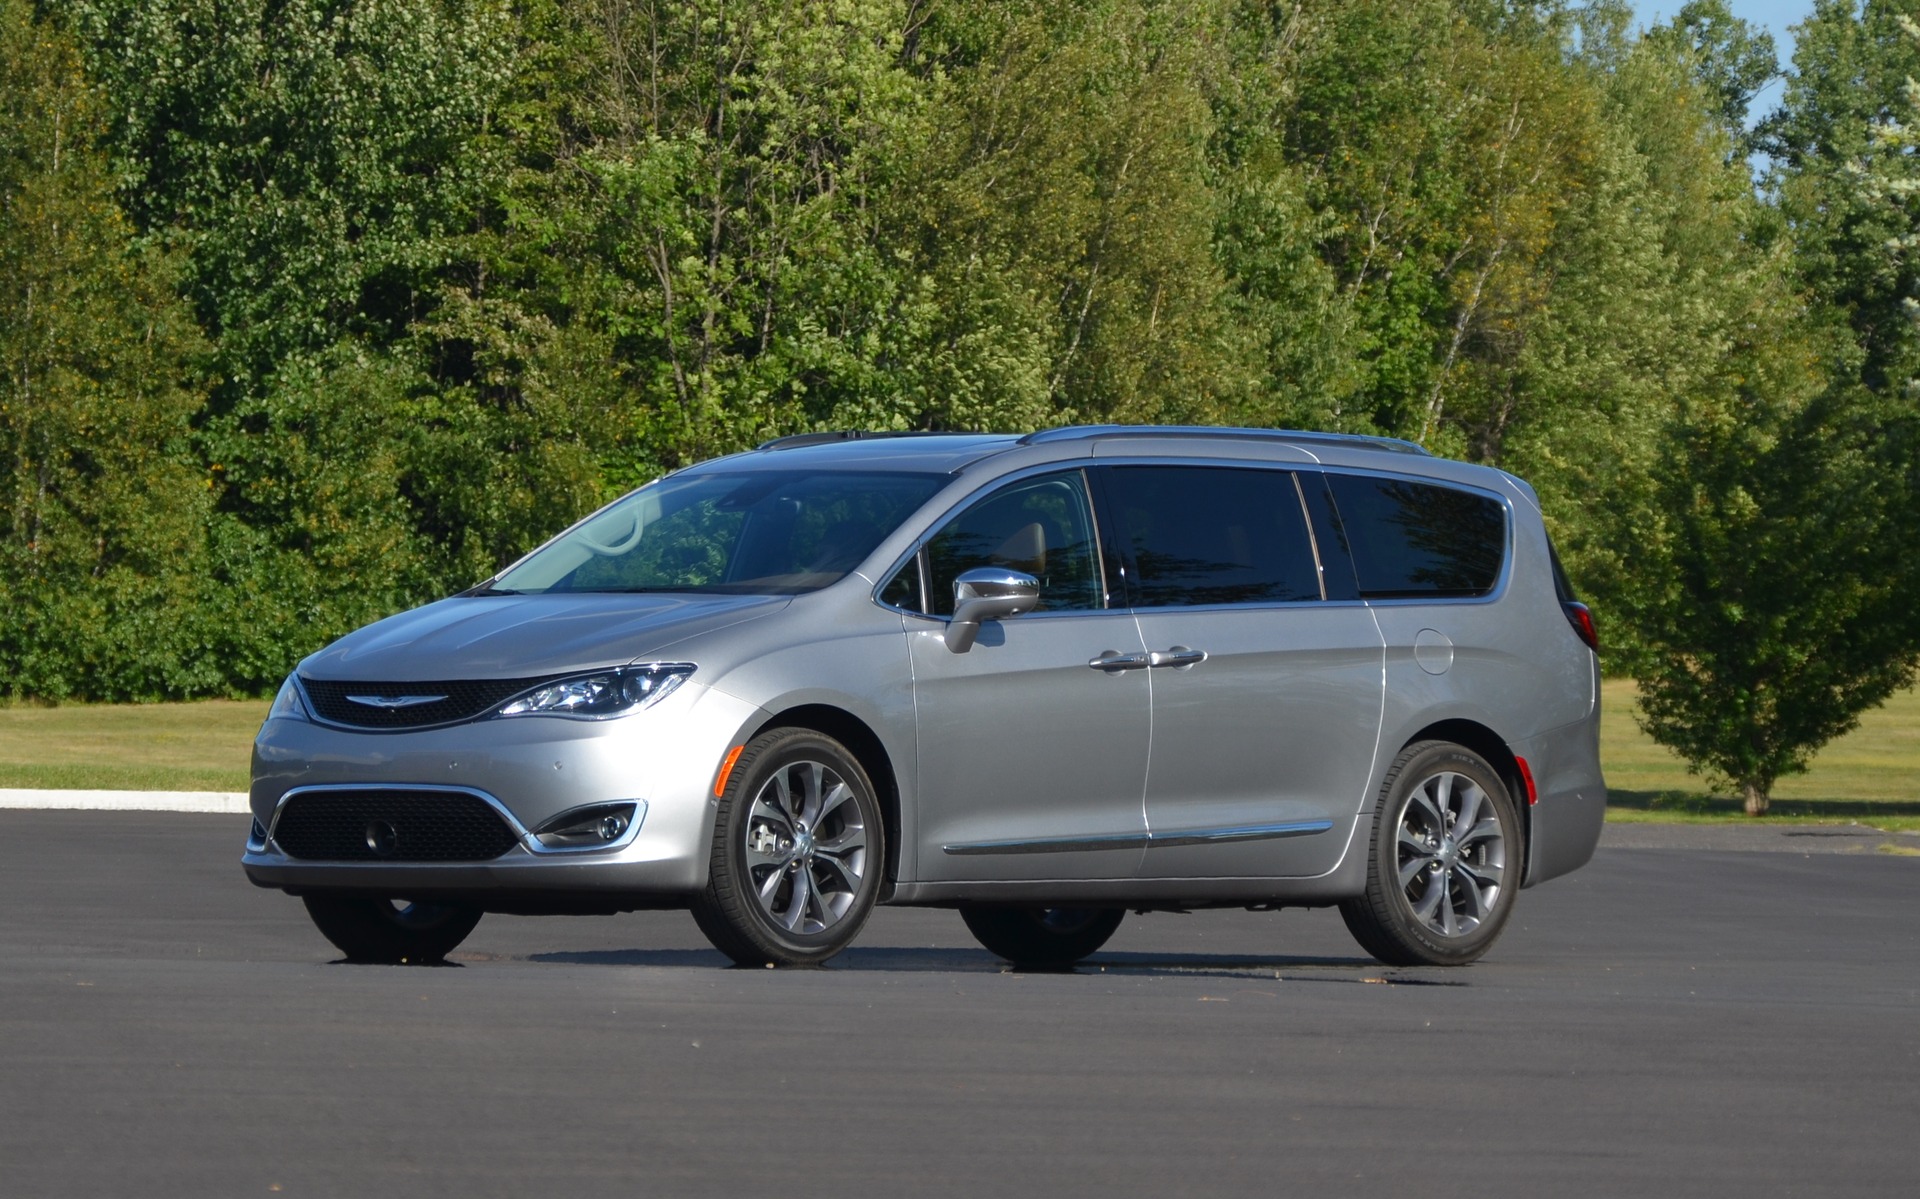 <p>Third place: 2017 Chrysler Pacifica</p>